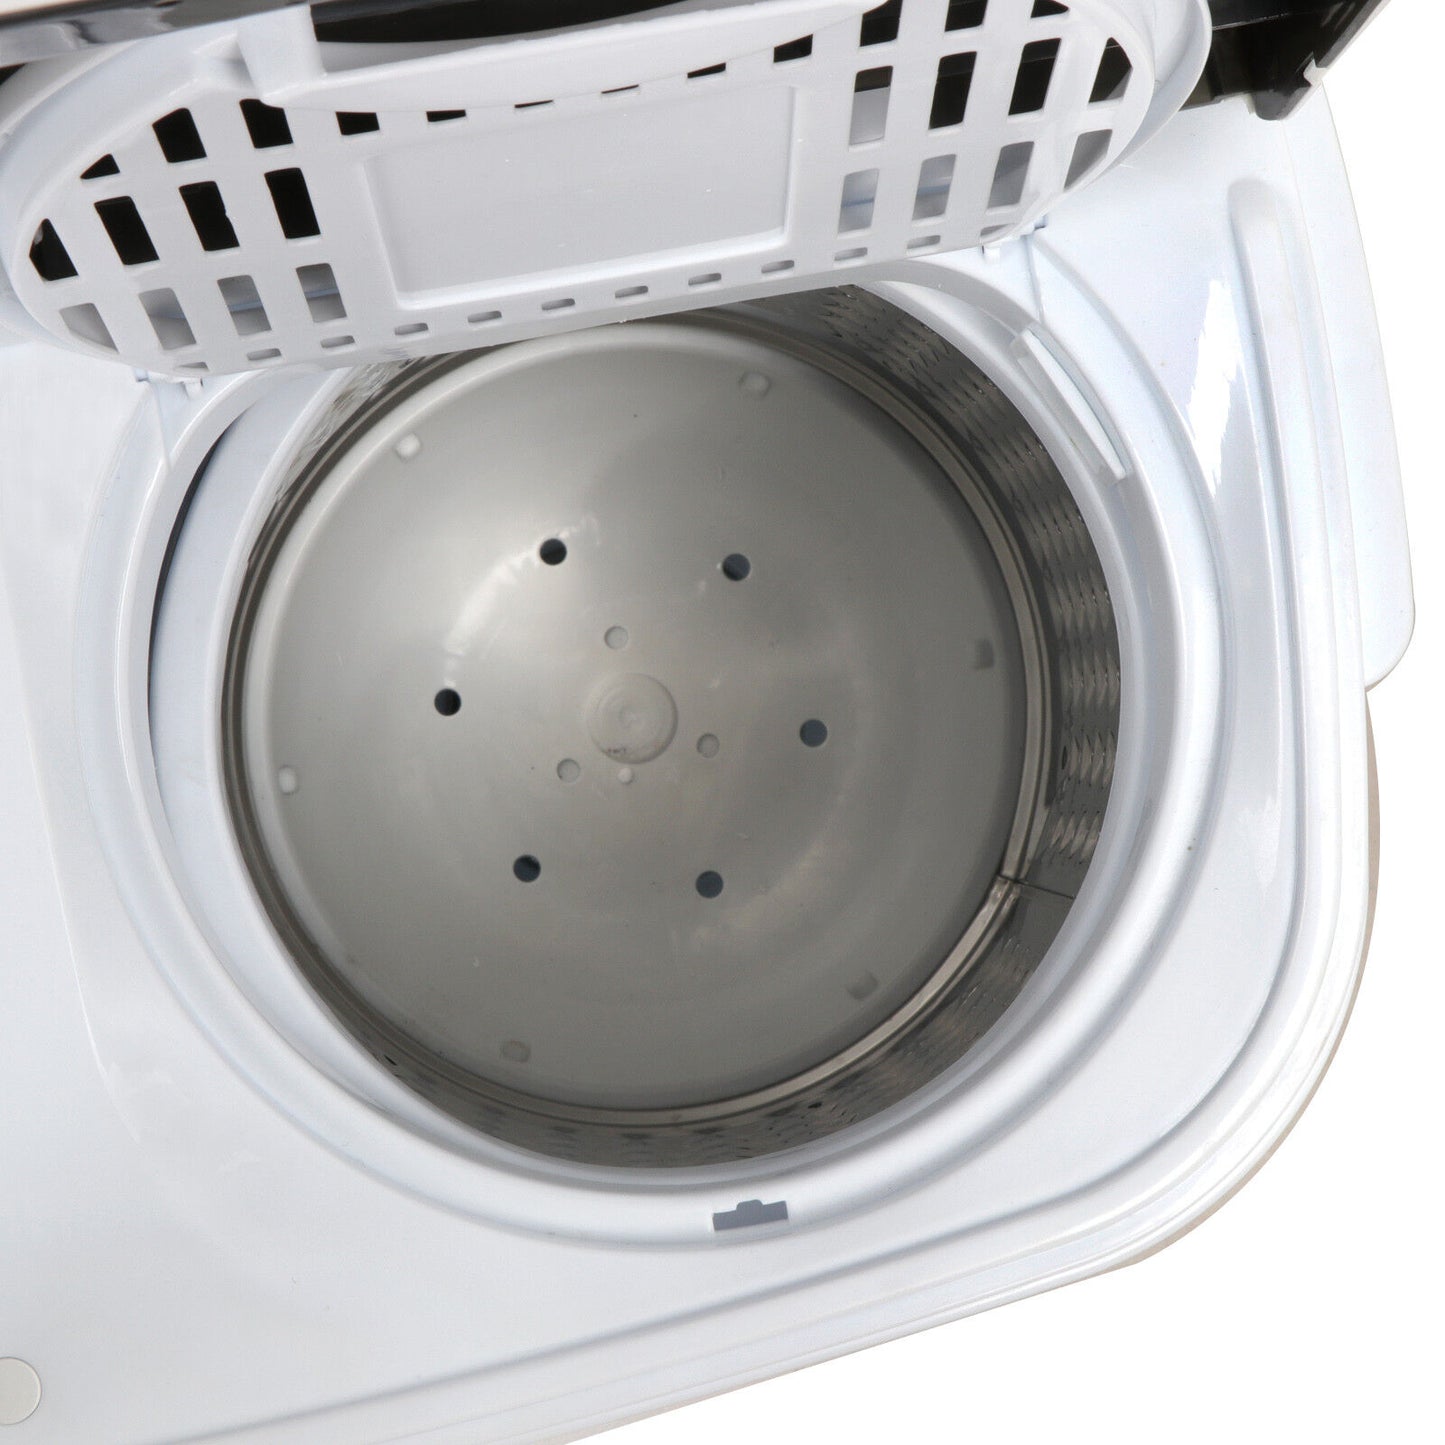 White Compact Portable Washer & Dryer with Mini Washing Machine and Spin Dryer